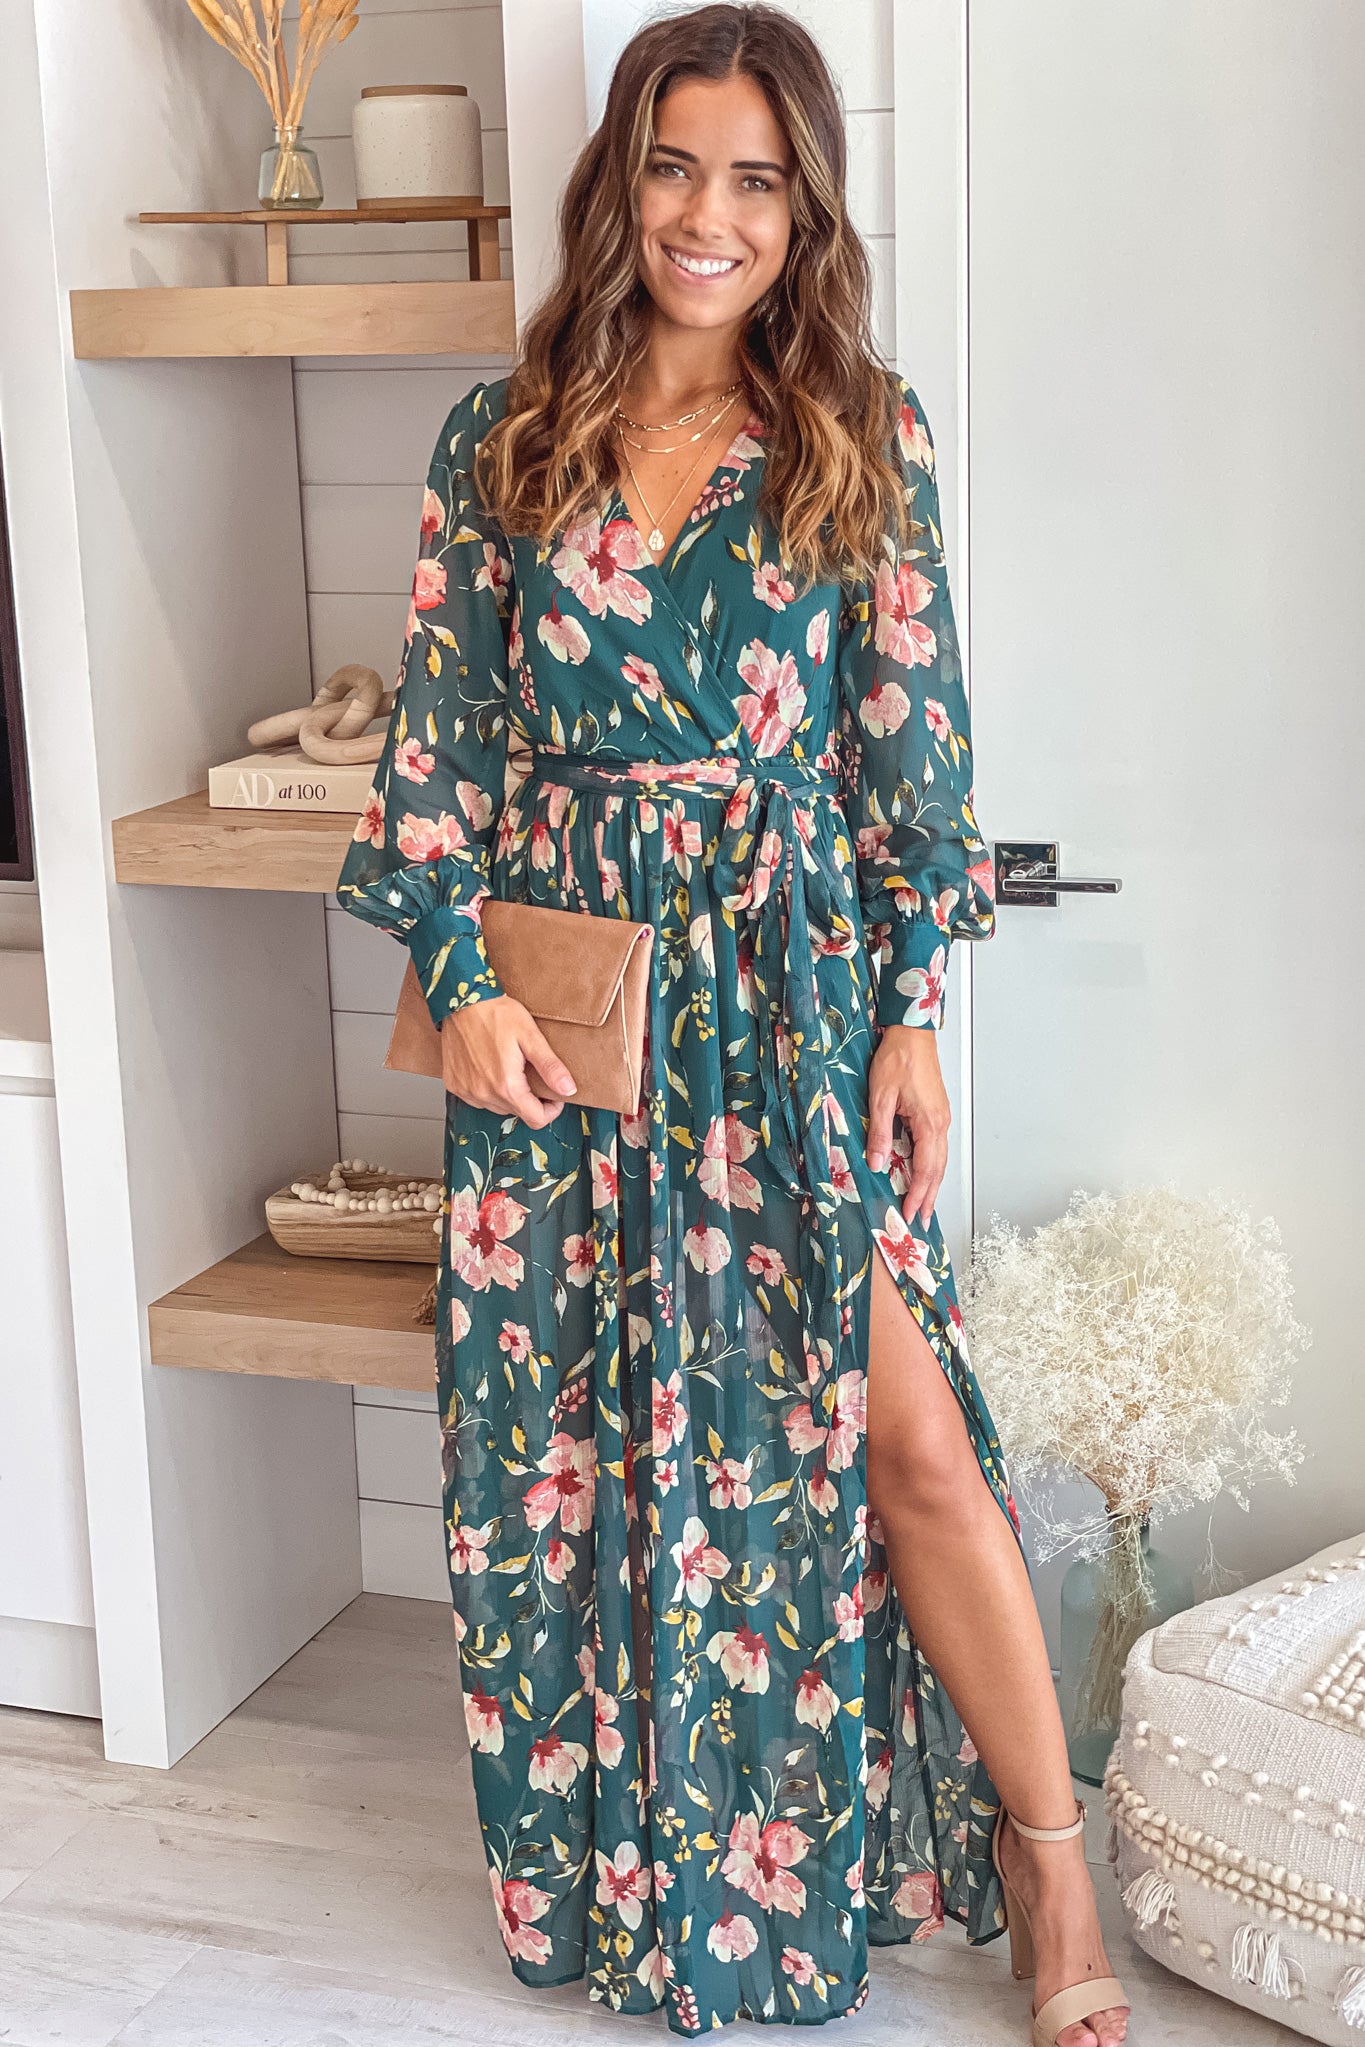 Hunter Green Floral Maxi Dress | Vacation Maxi Dress – Saved by the Dress